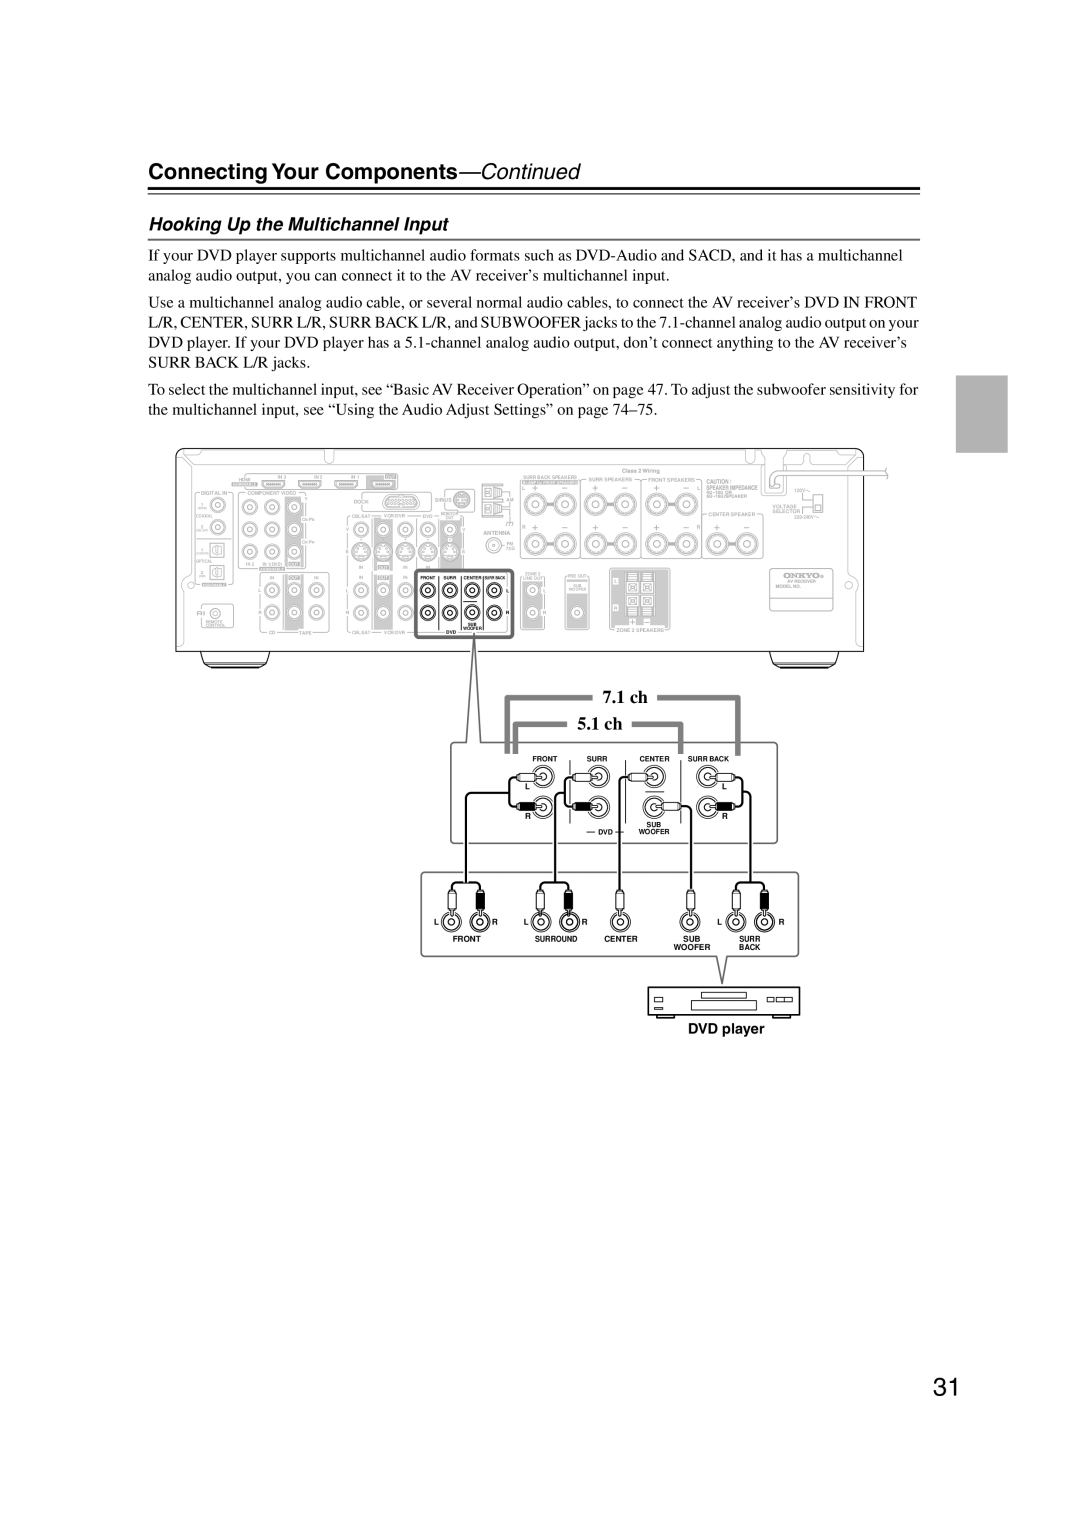 Onkyo HT-S5100 instruction manual Hooking Up the Multichannel Input, Connecting Your Components—Continued, 7.1ch 5.1ch 